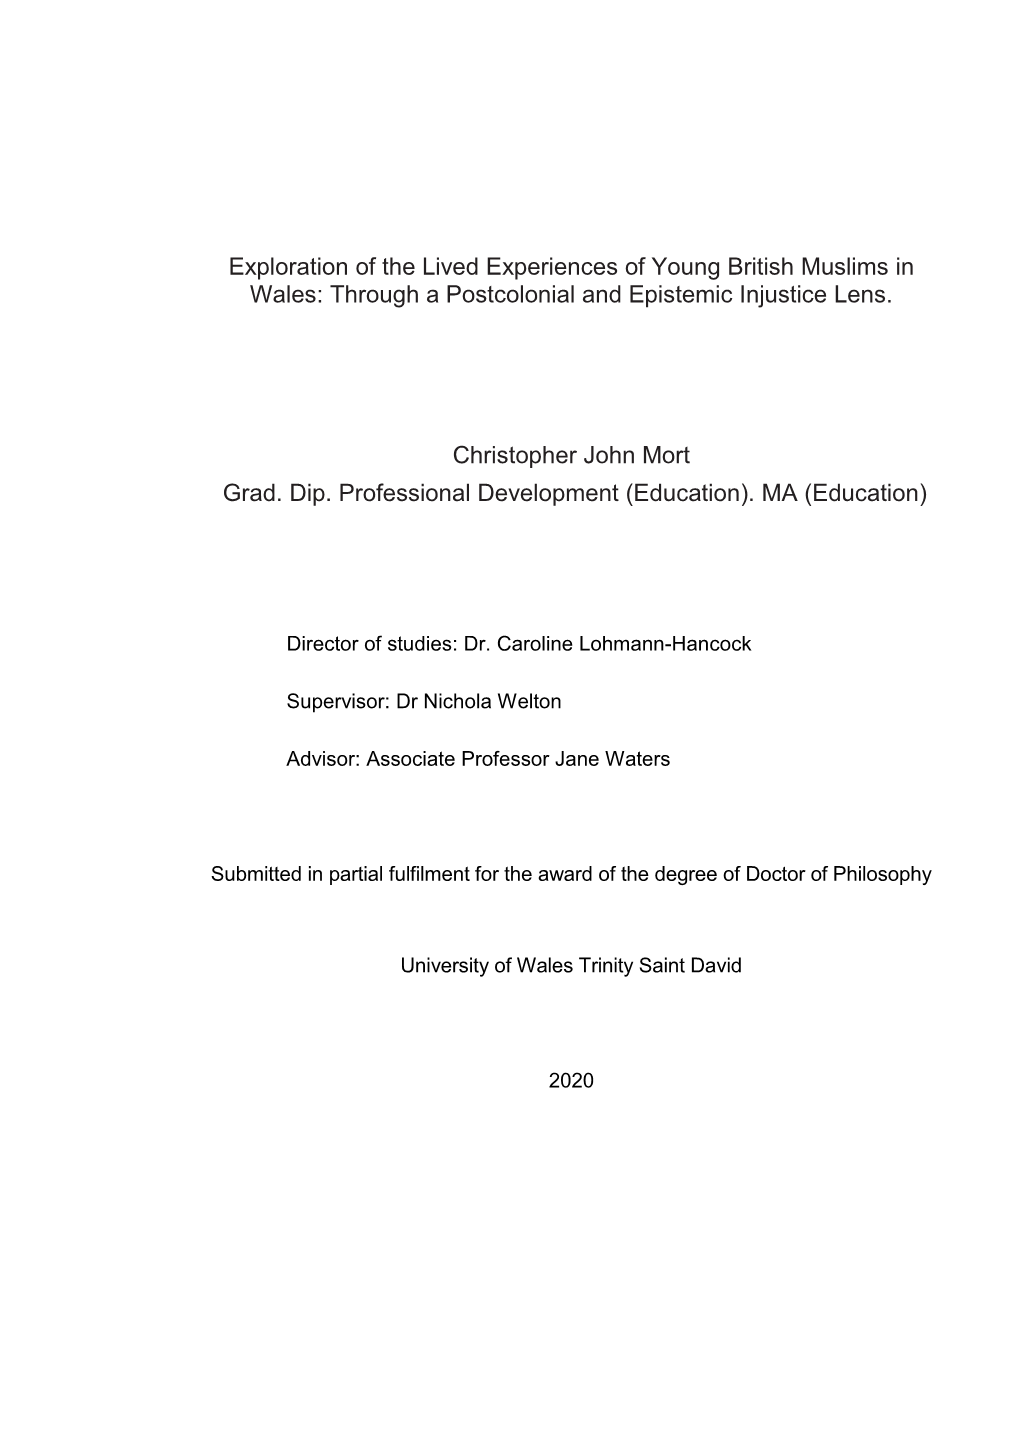 Exploration of the Lived Experiences of Young British Muslims in Wales: Through a Postcolonial and Epistemic Injustice Lens